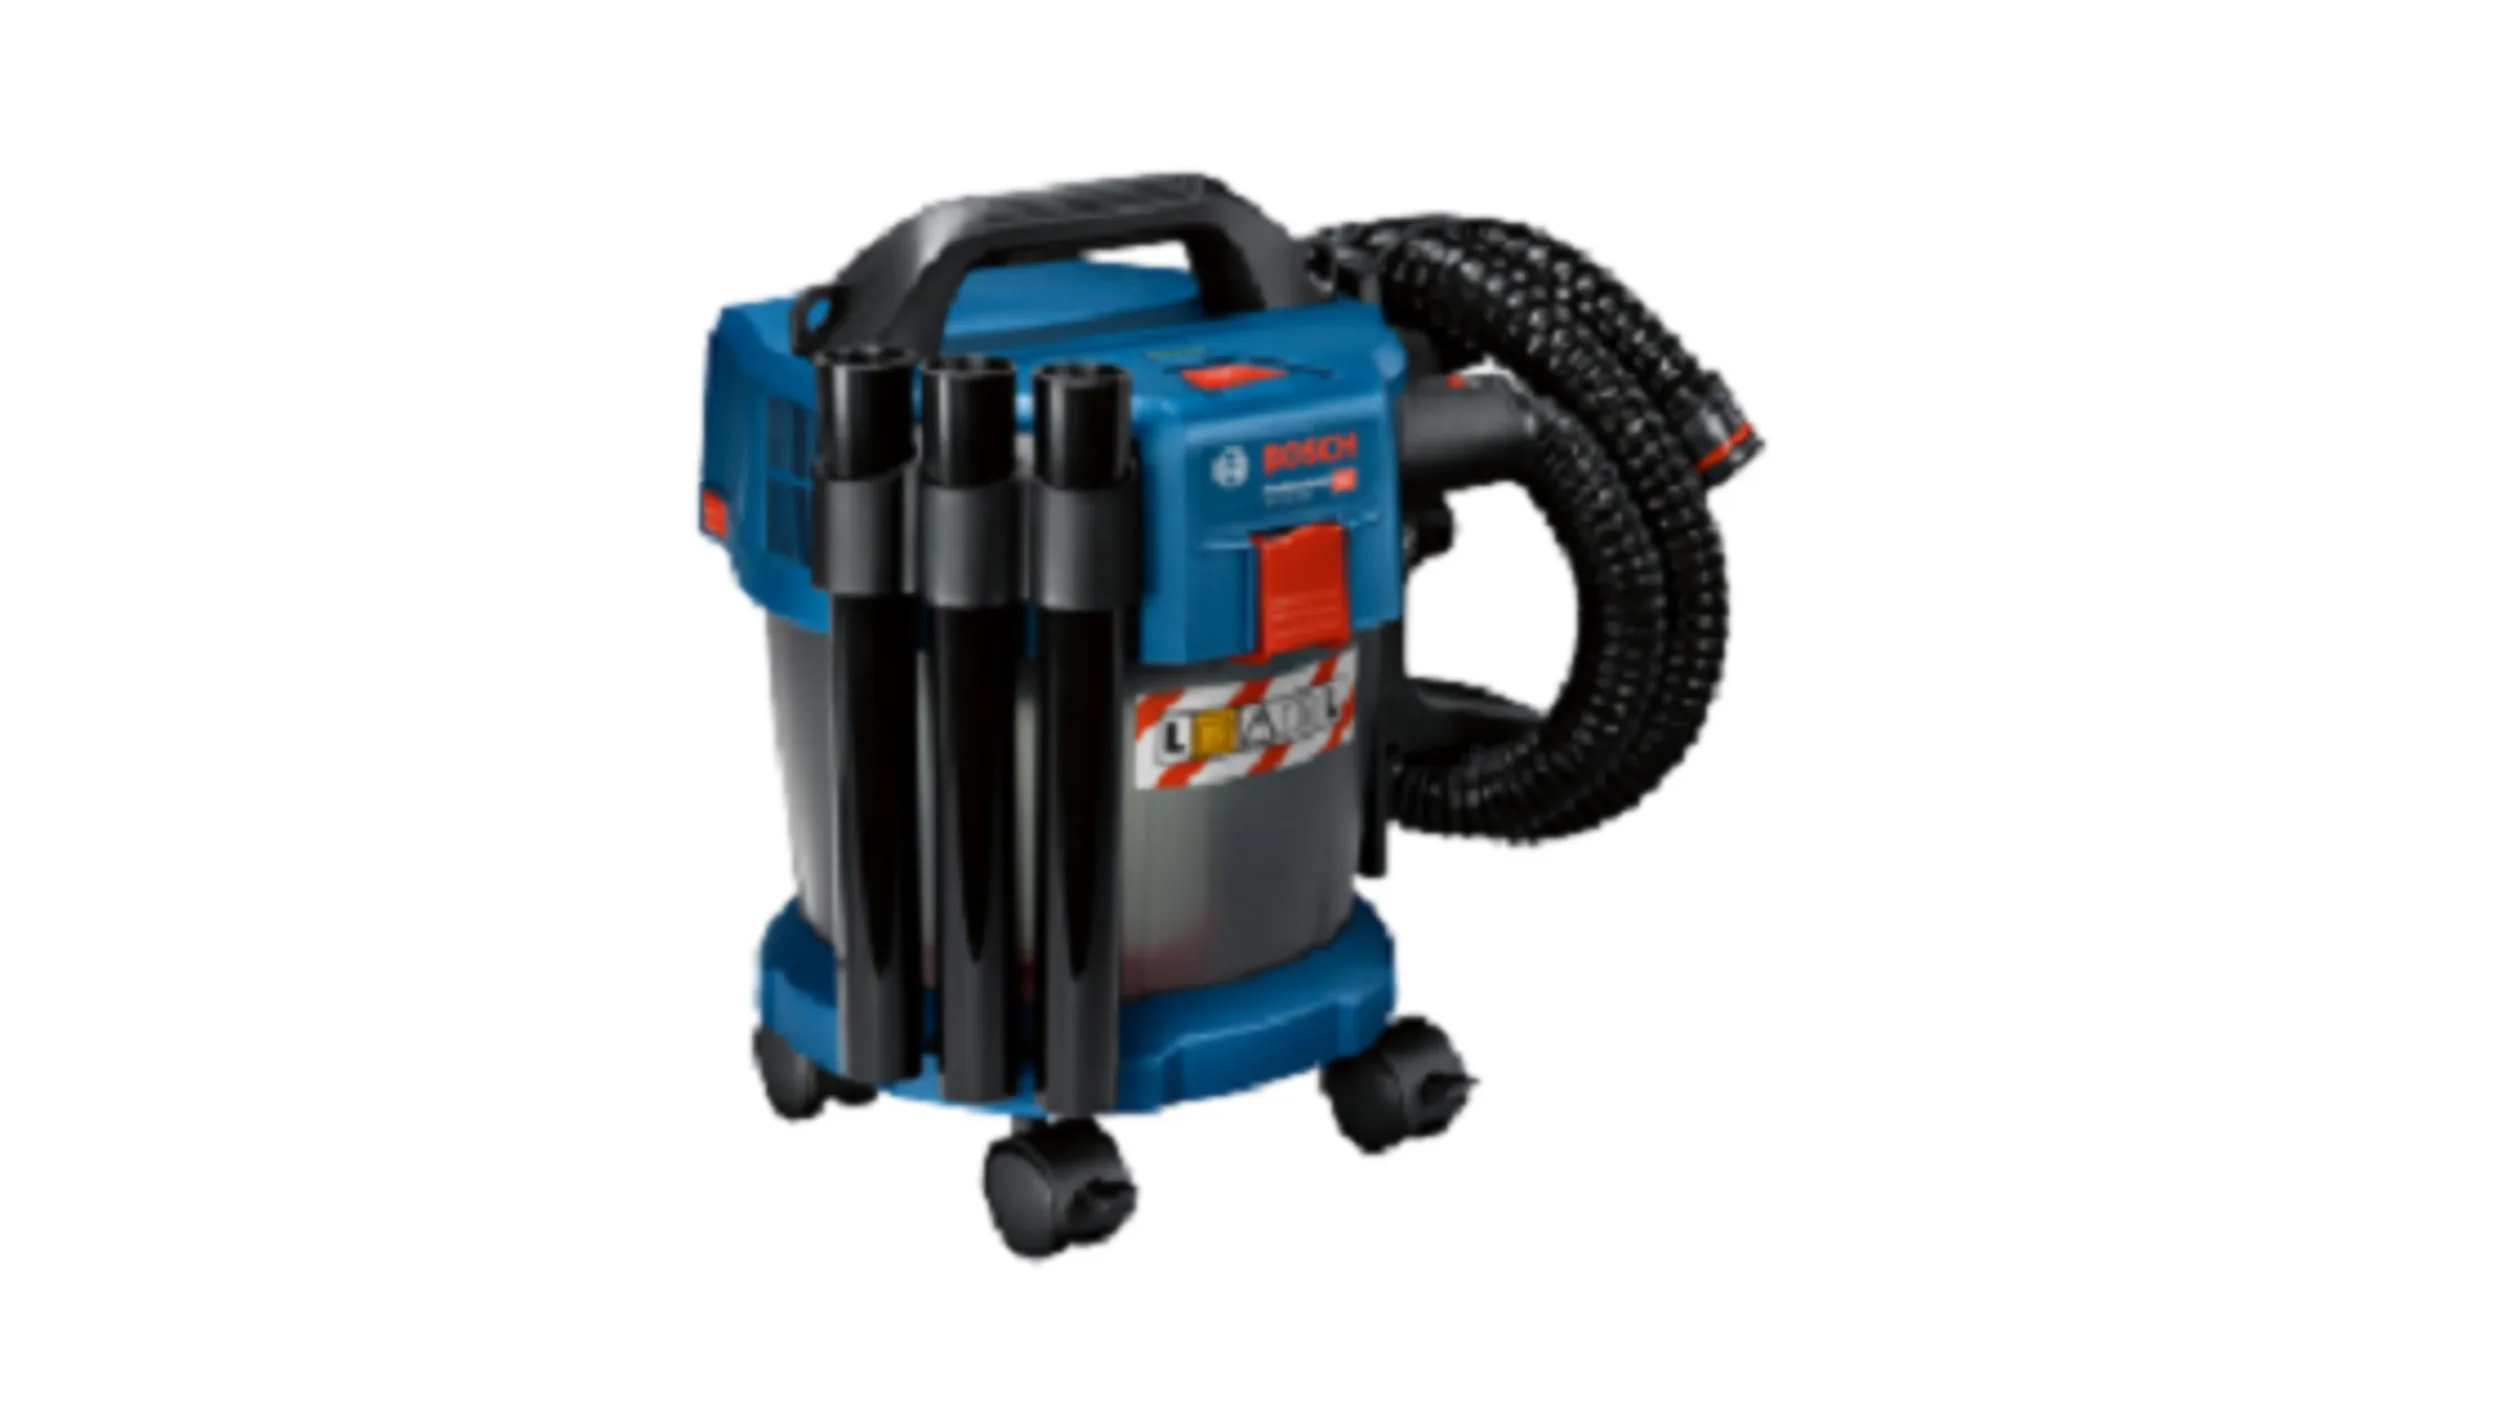 Bosch GAS 18V-10 L Cordless Dust Extractor (Naked)